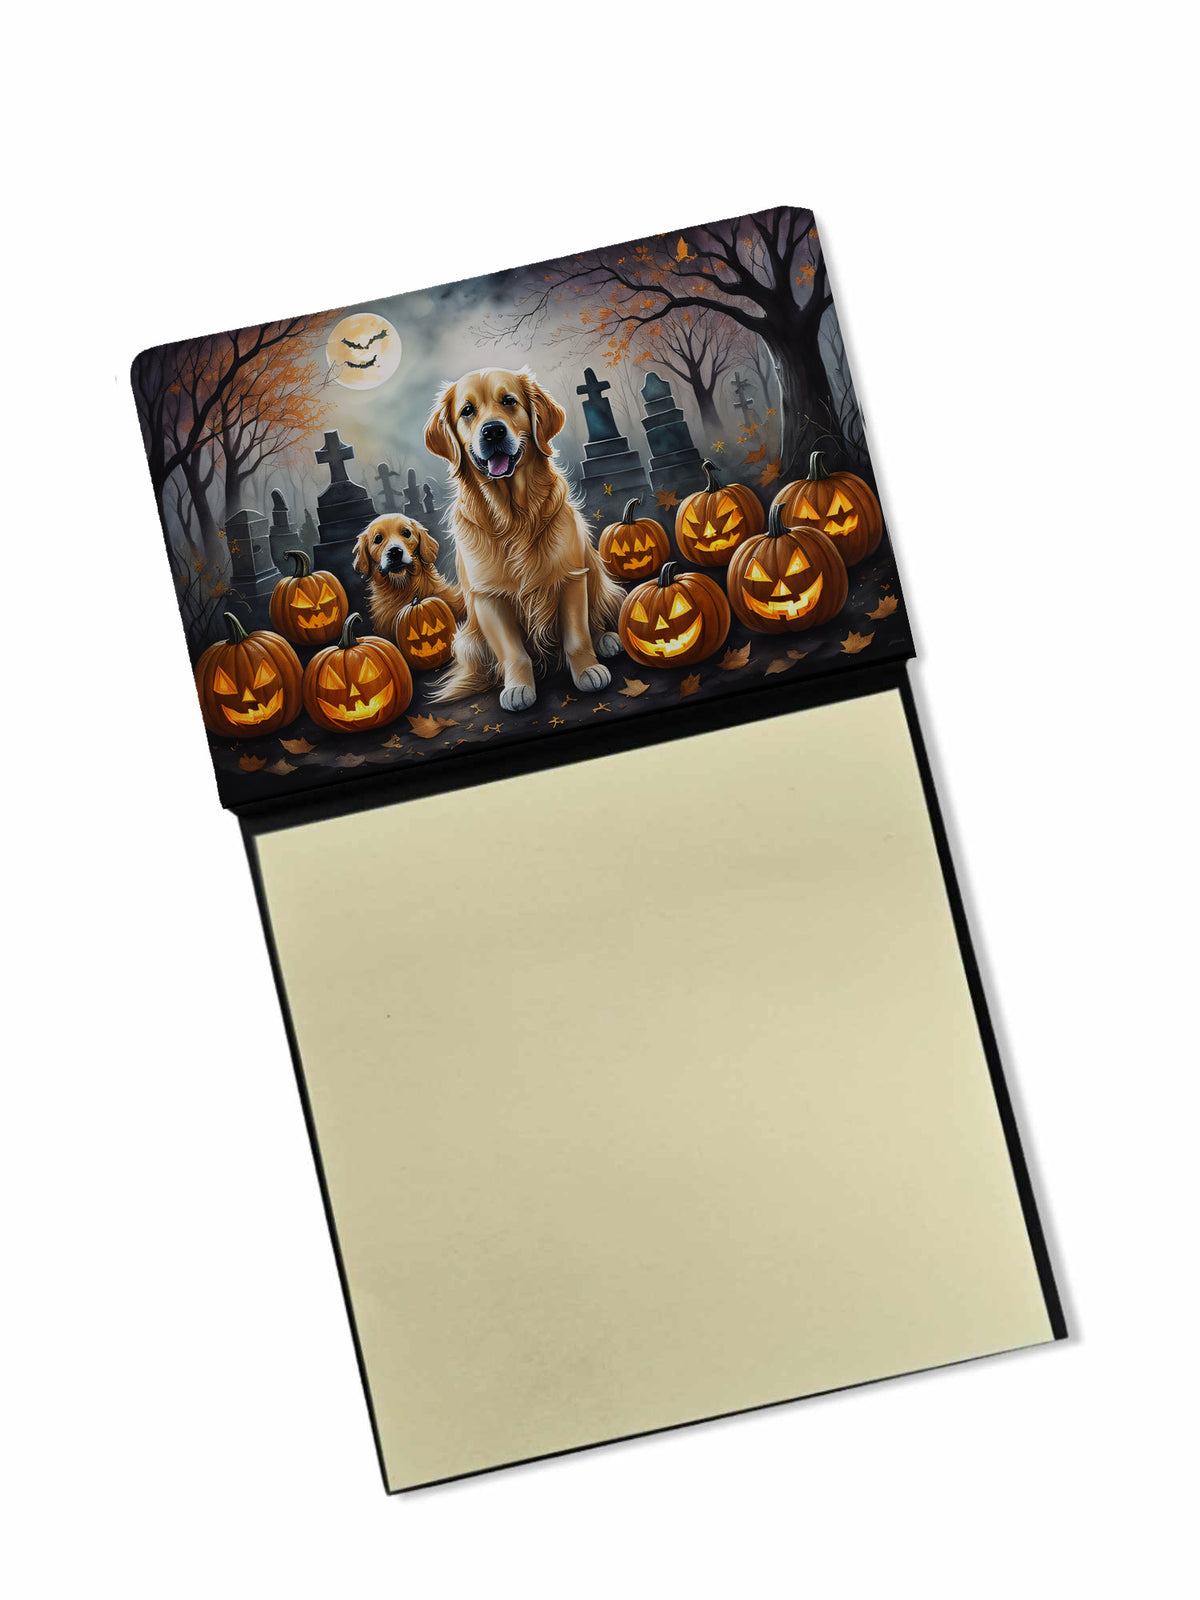 Buy this Golden Retriever Spooky Halloween Sticky Note Holder